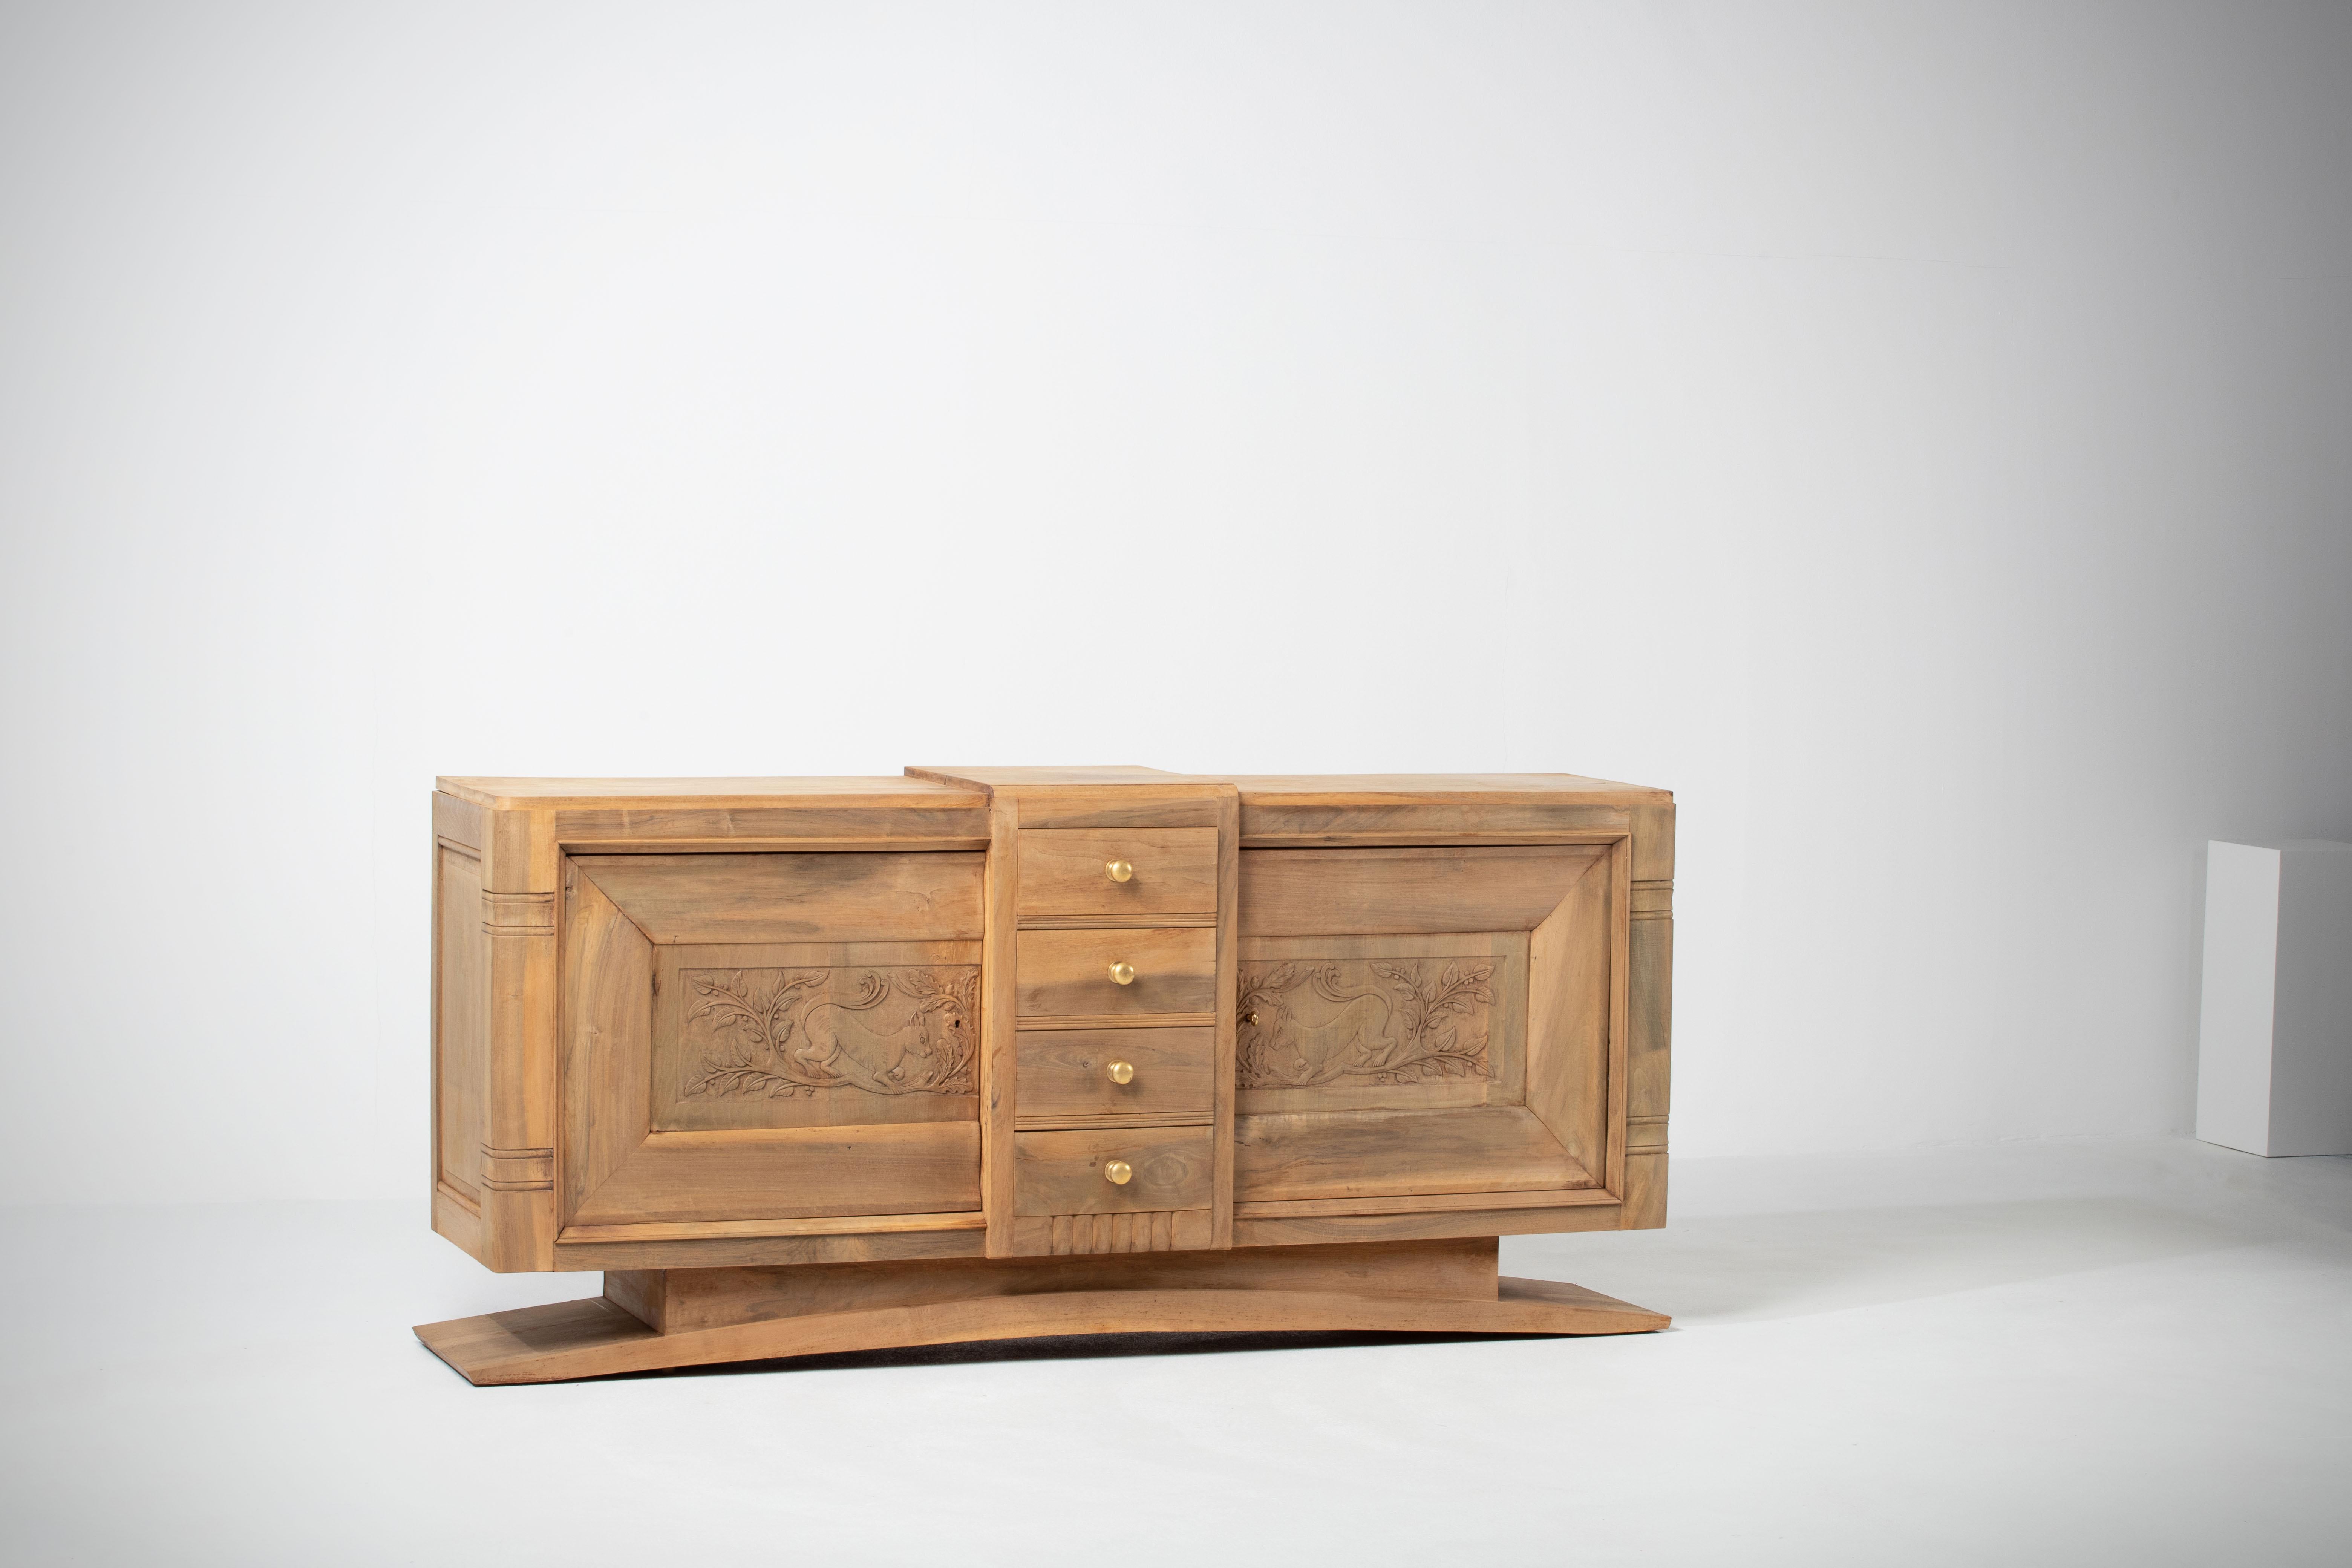 French Art Deco Oak Sideboard with Handcarved Doors, France, 1940s For Sale